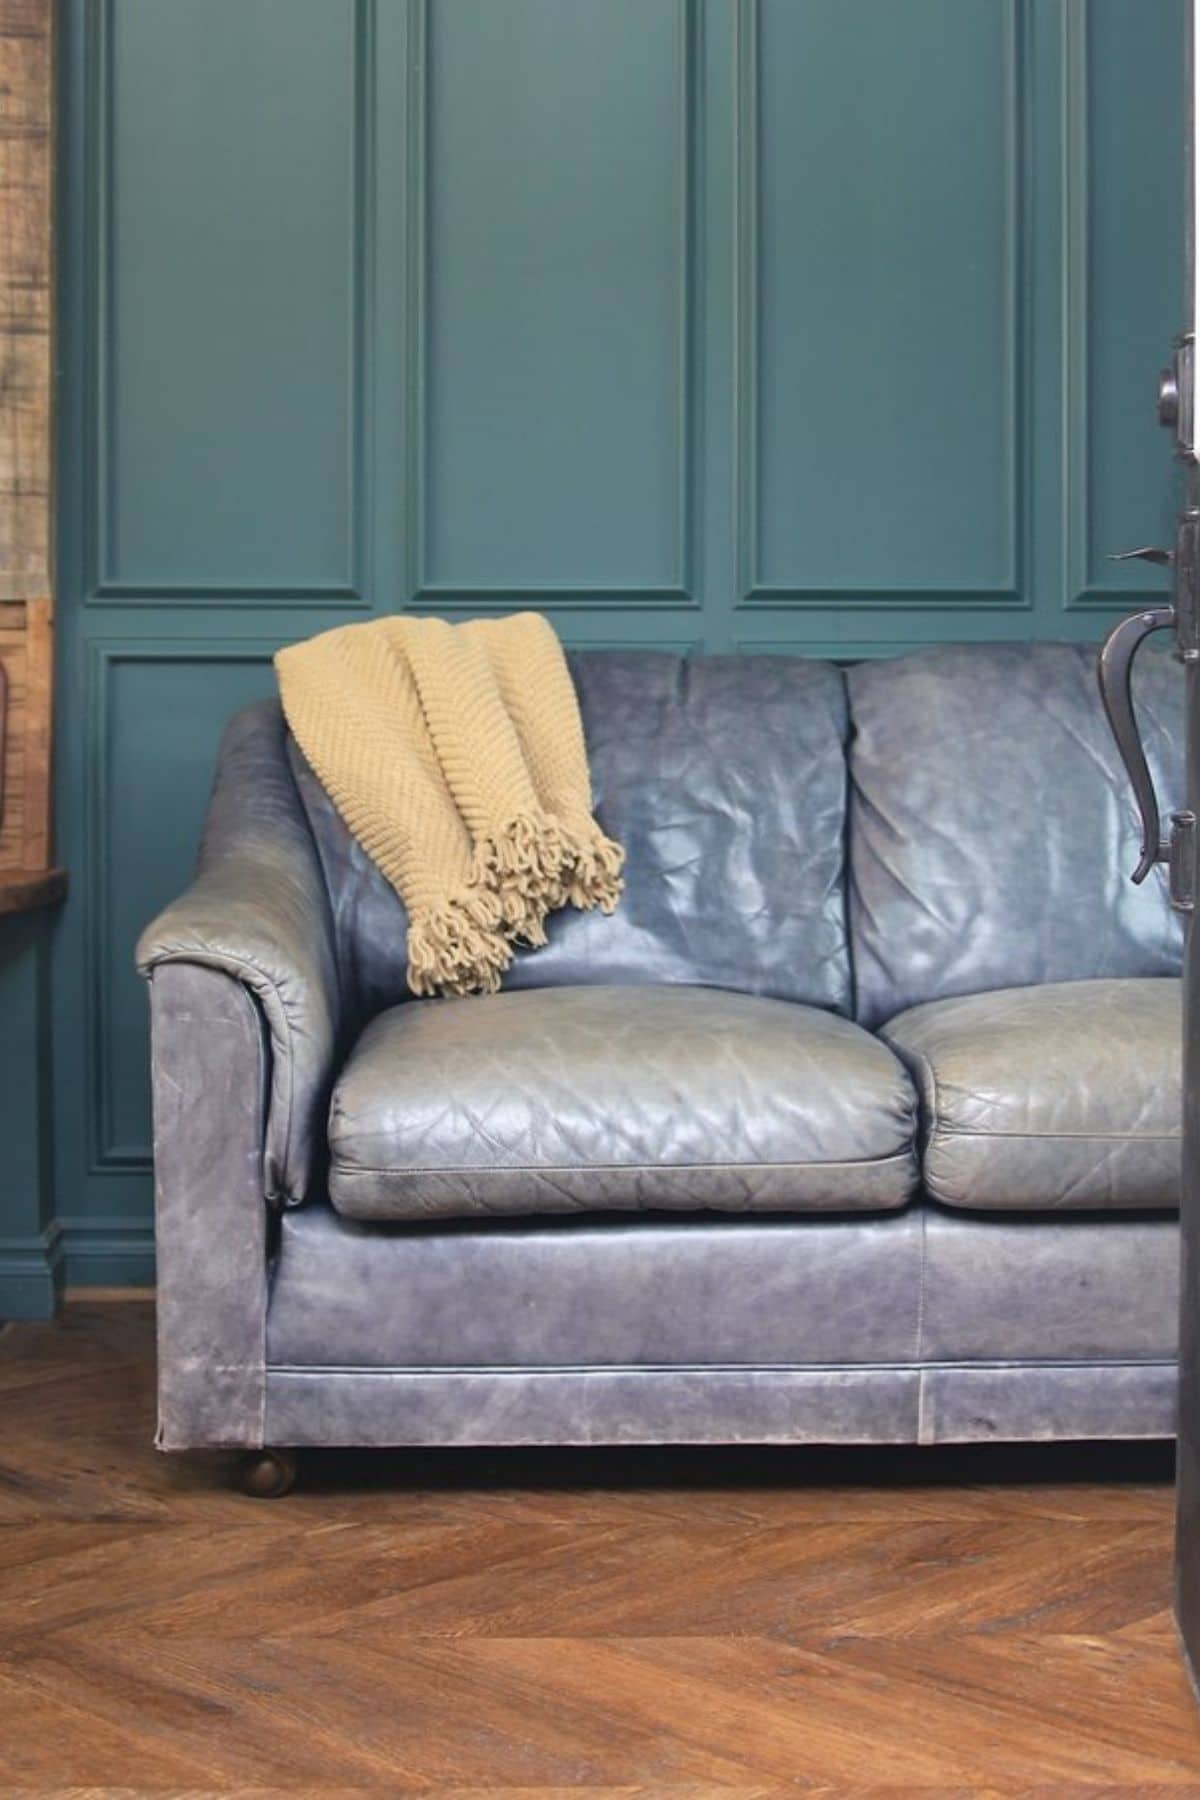 Gray leather sofa against teal wall